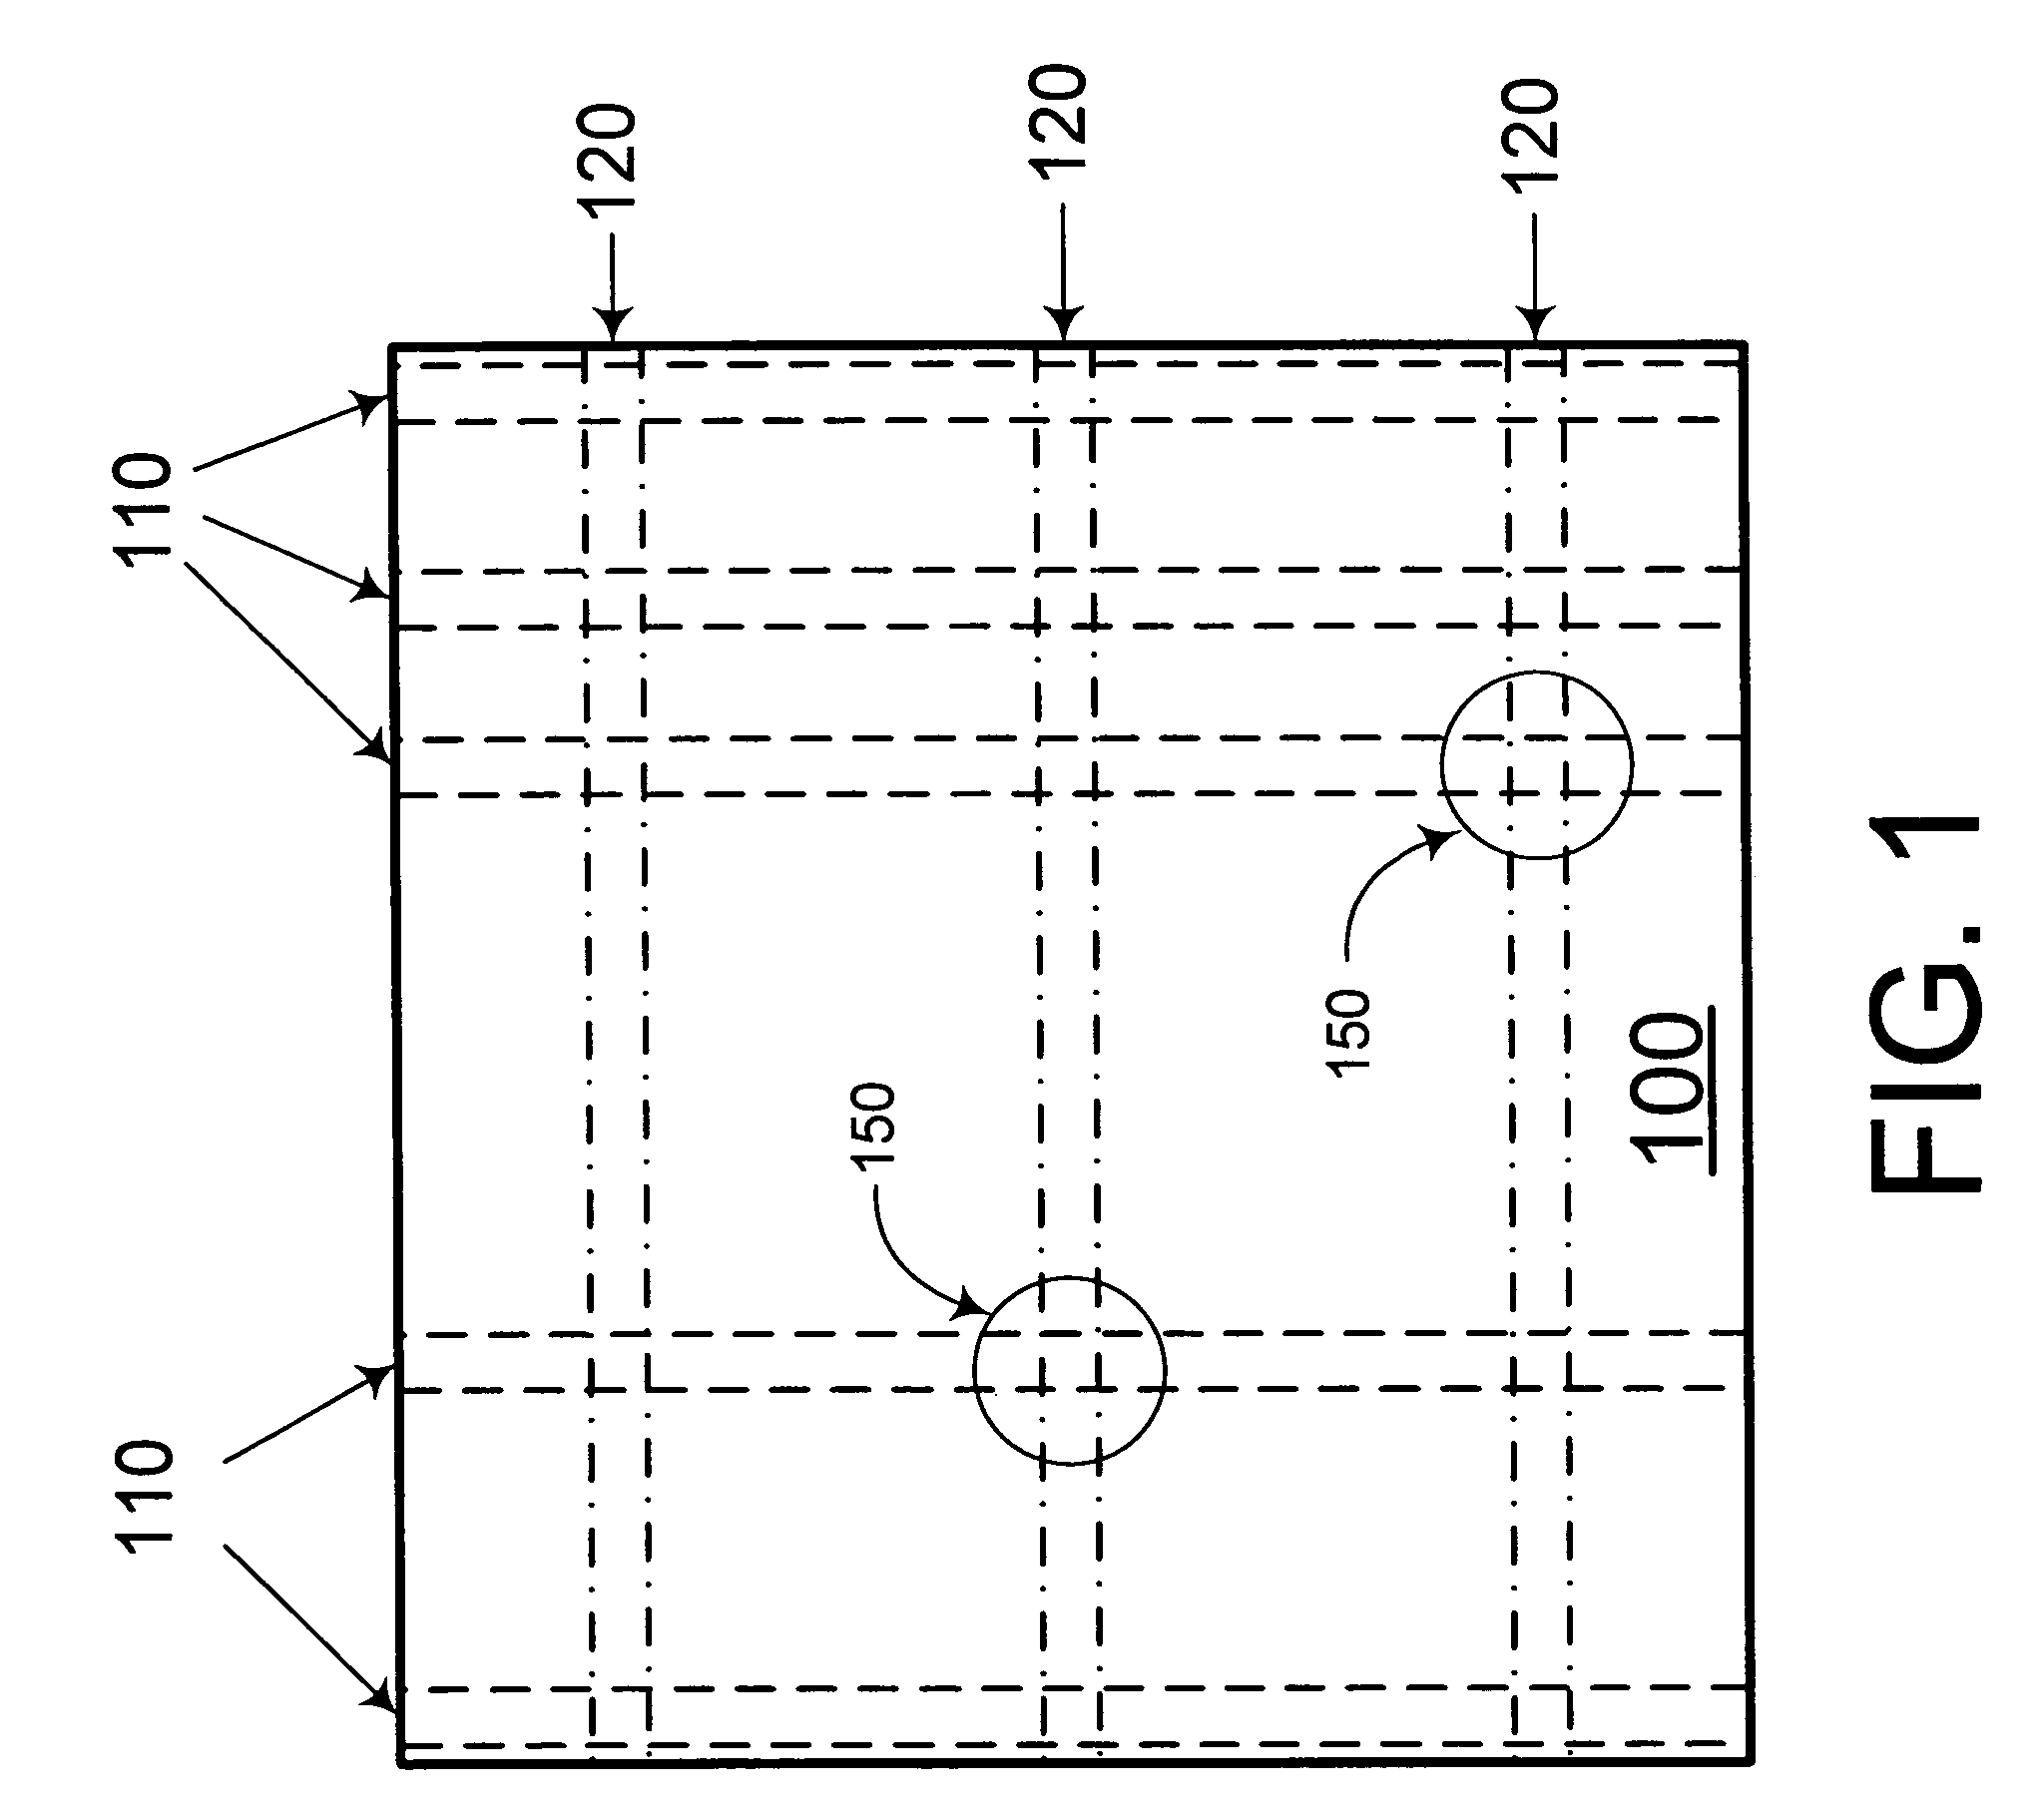 Integrated aircraft structural floor